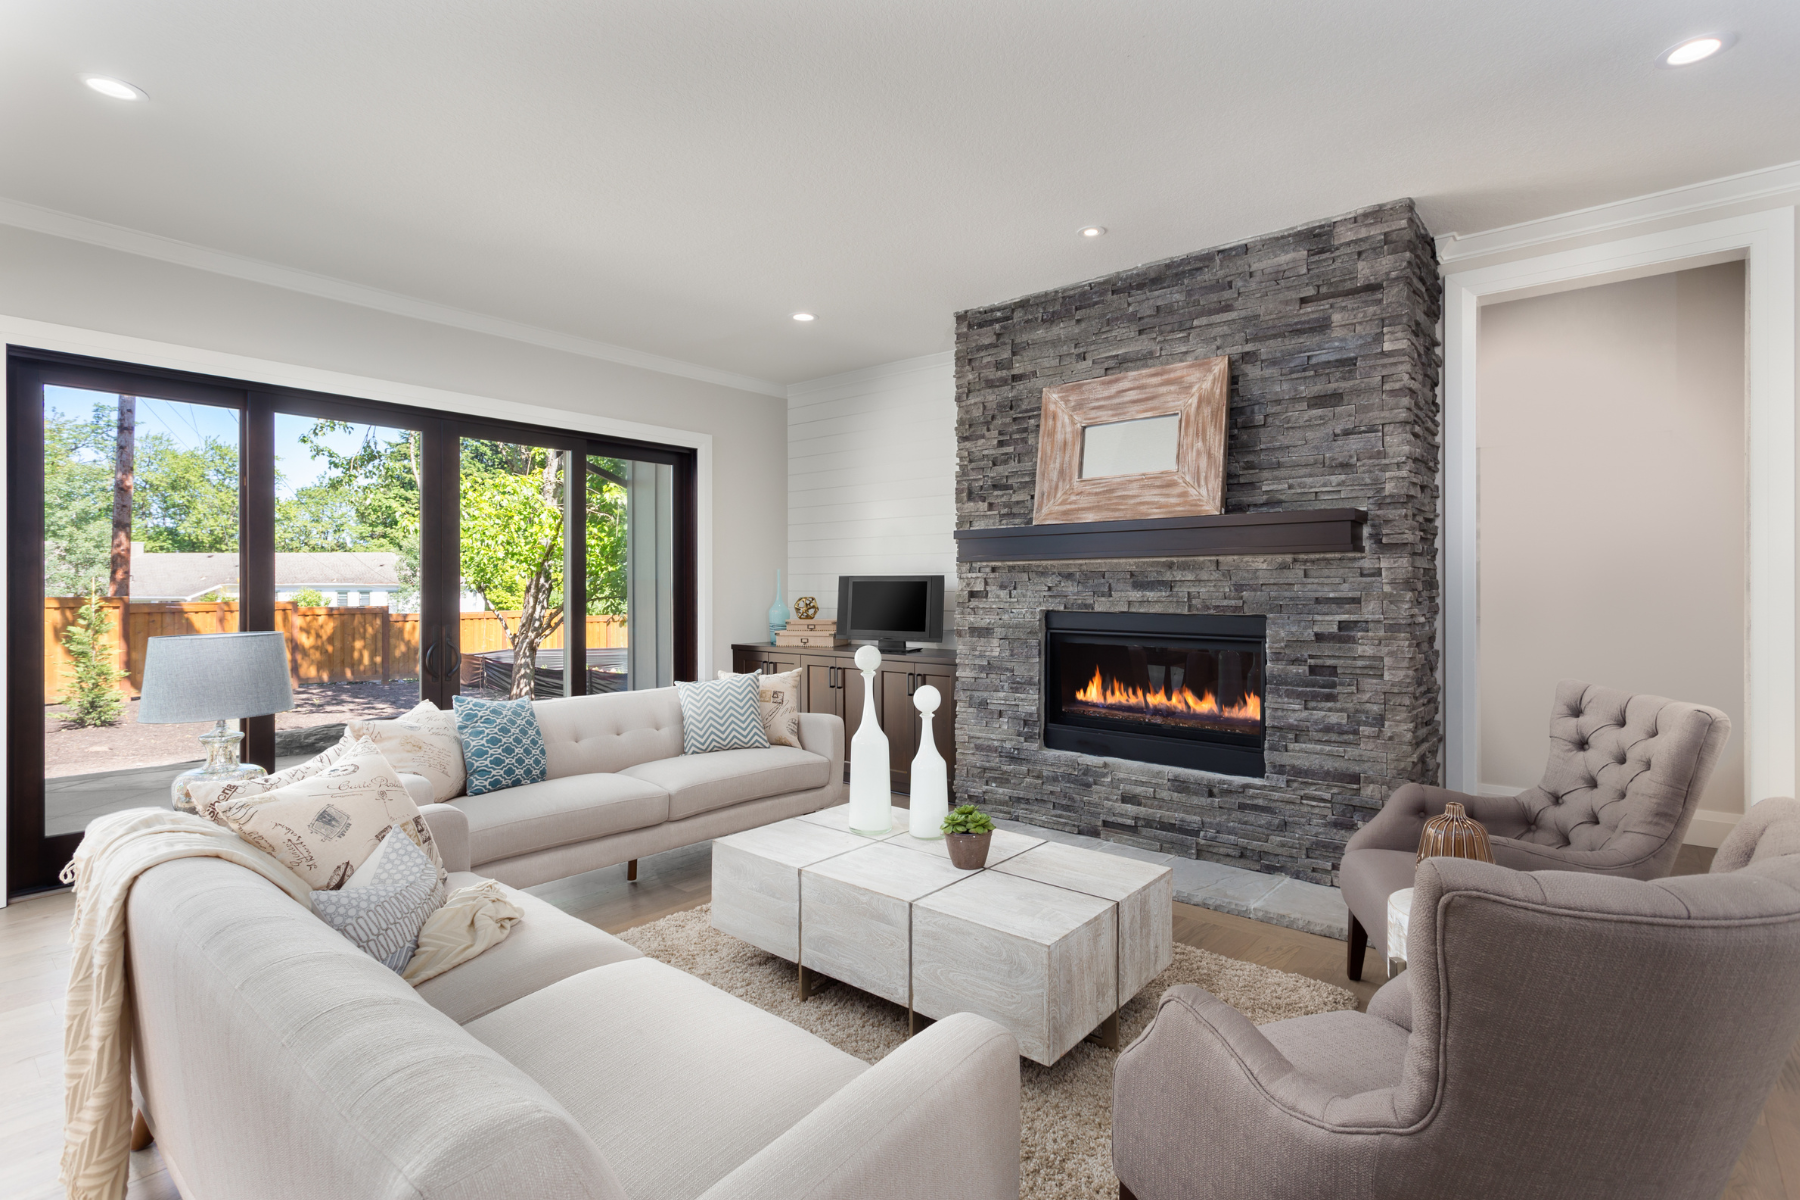 Classic style living room with off-white furnishings and a brick fireplace